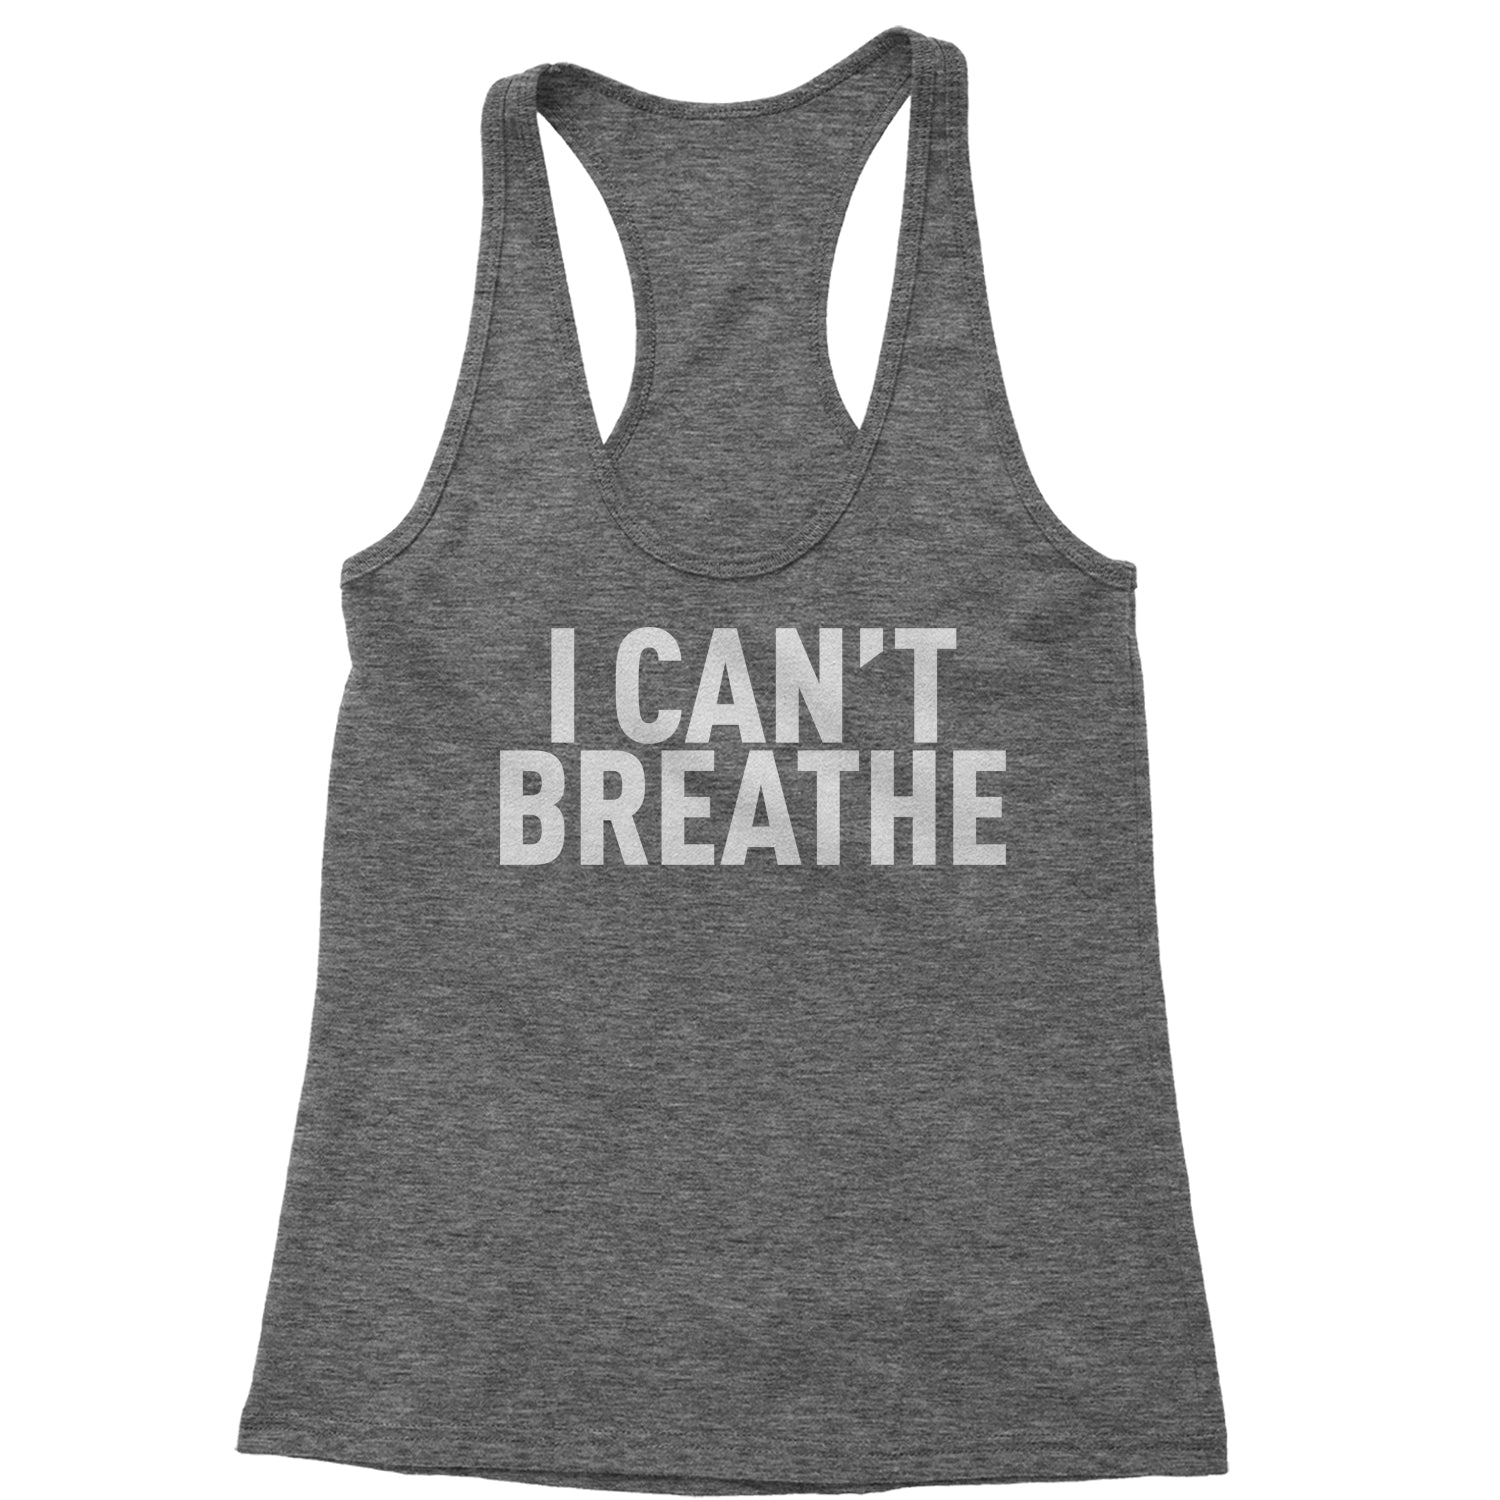 I Can't Breathe Social Justice Racerback Tank Top for Women african, africanamerican, american, black, blm, breonna, floyd, george, life, lives, matter, taylor by Expression Tees